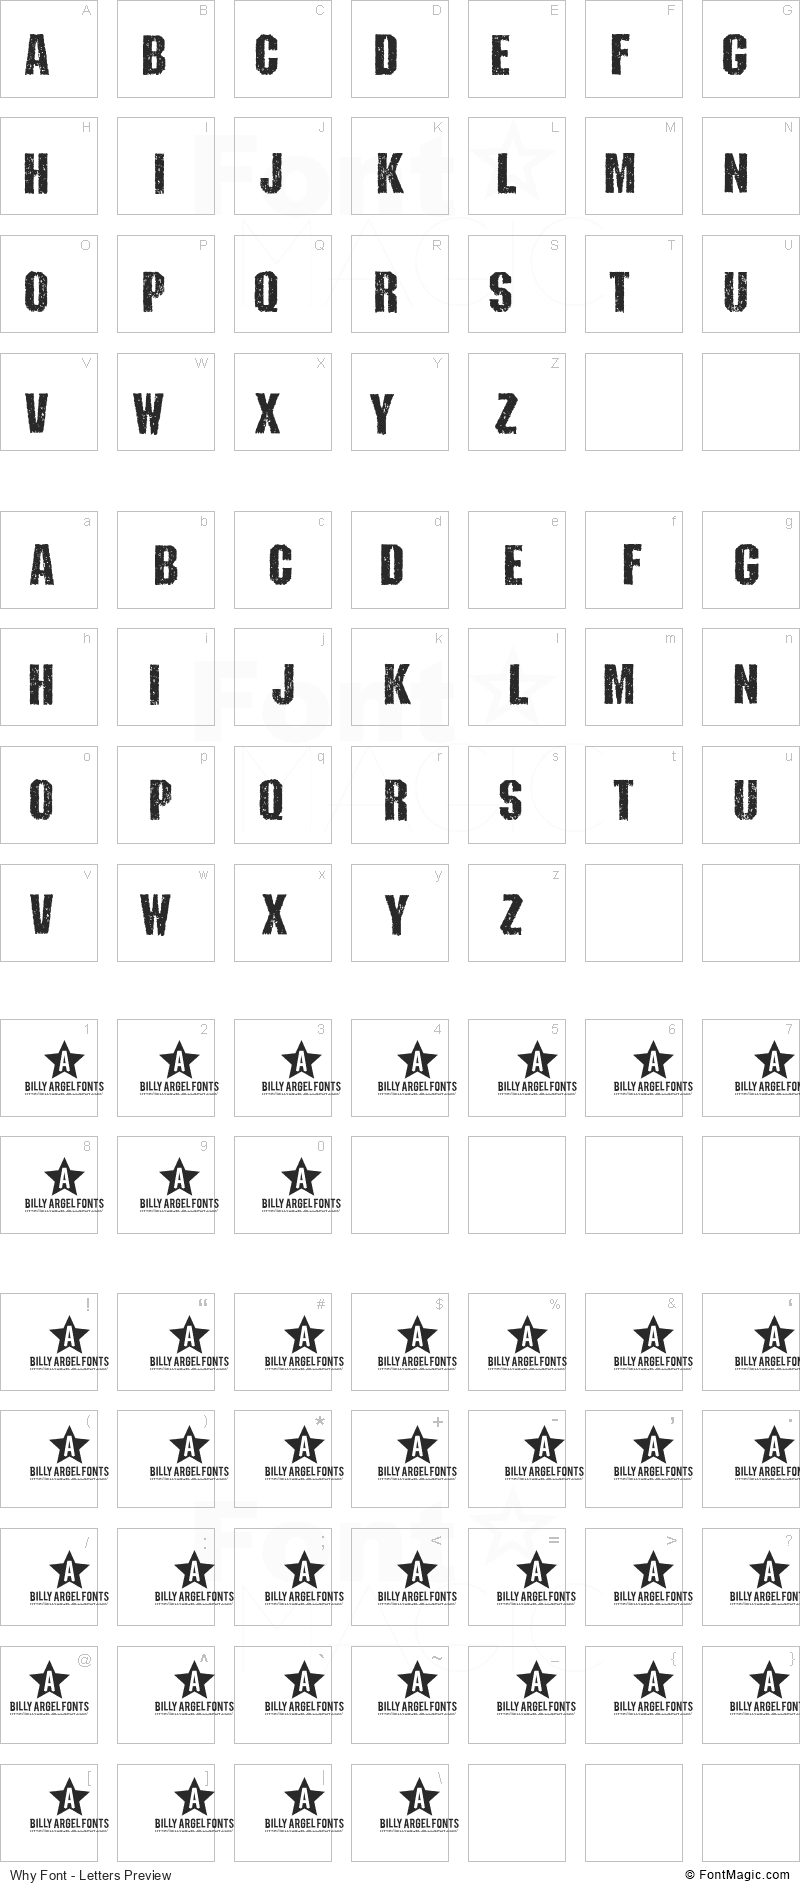 Why Font - All Latters Preview Chart